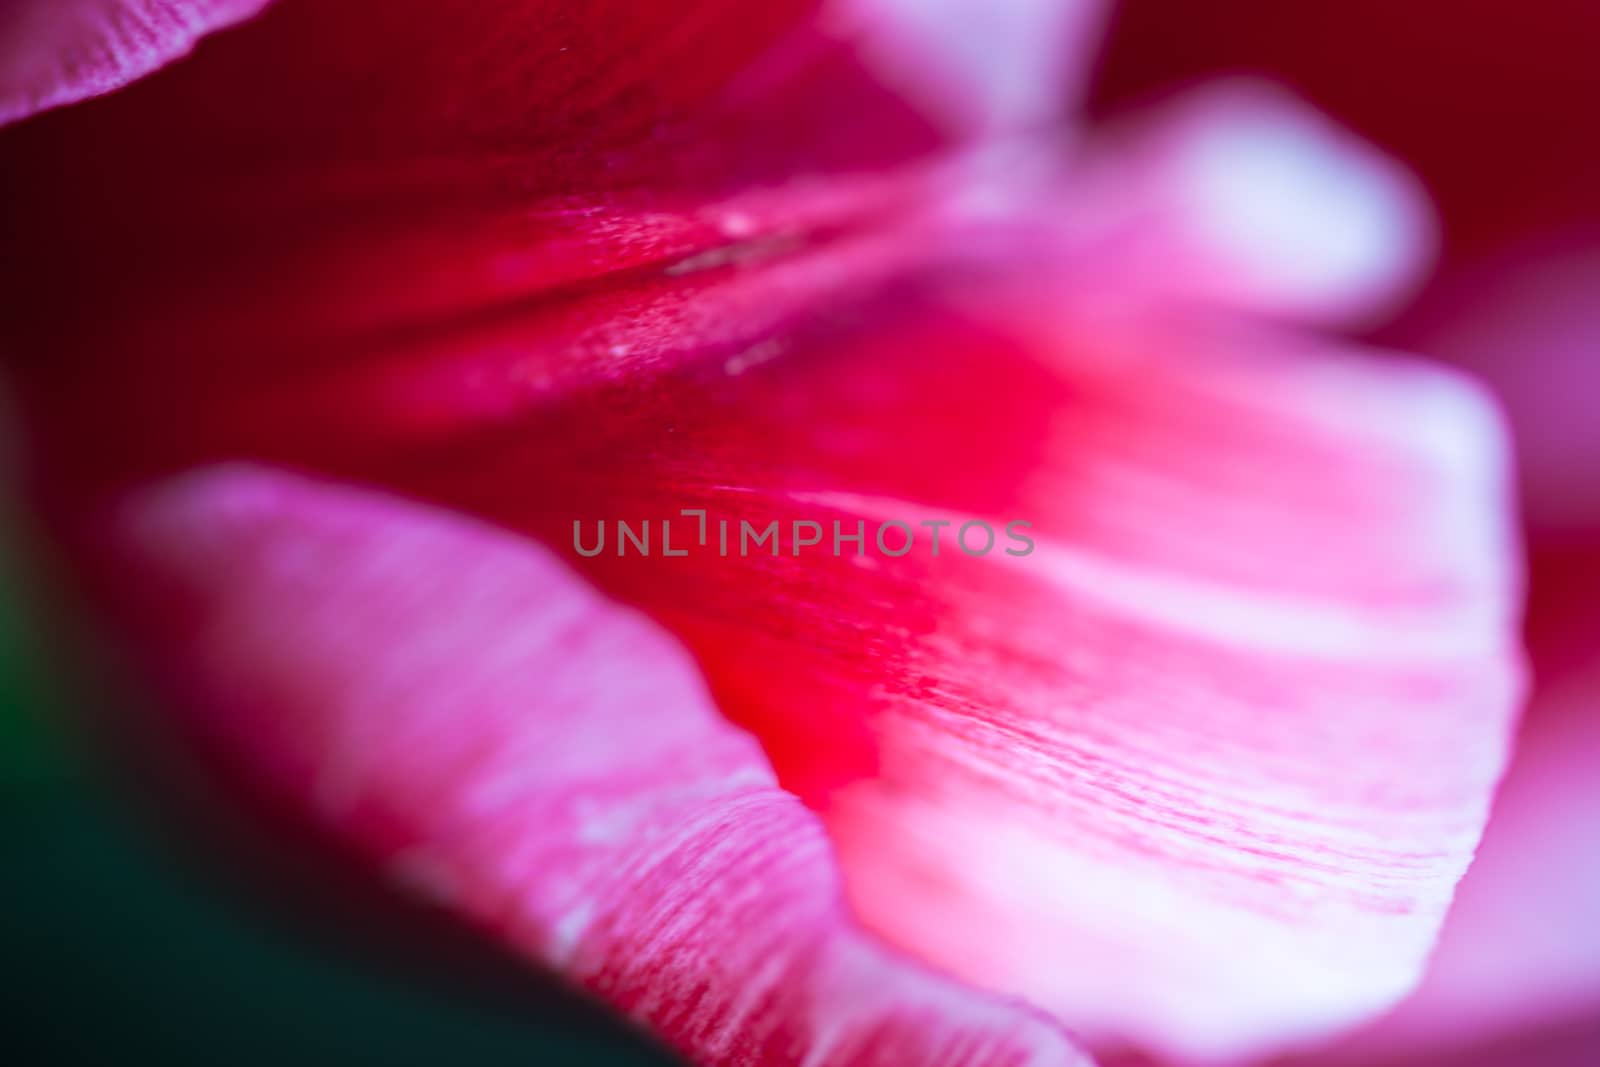 Closeup of the petals of the pink tulip flower.